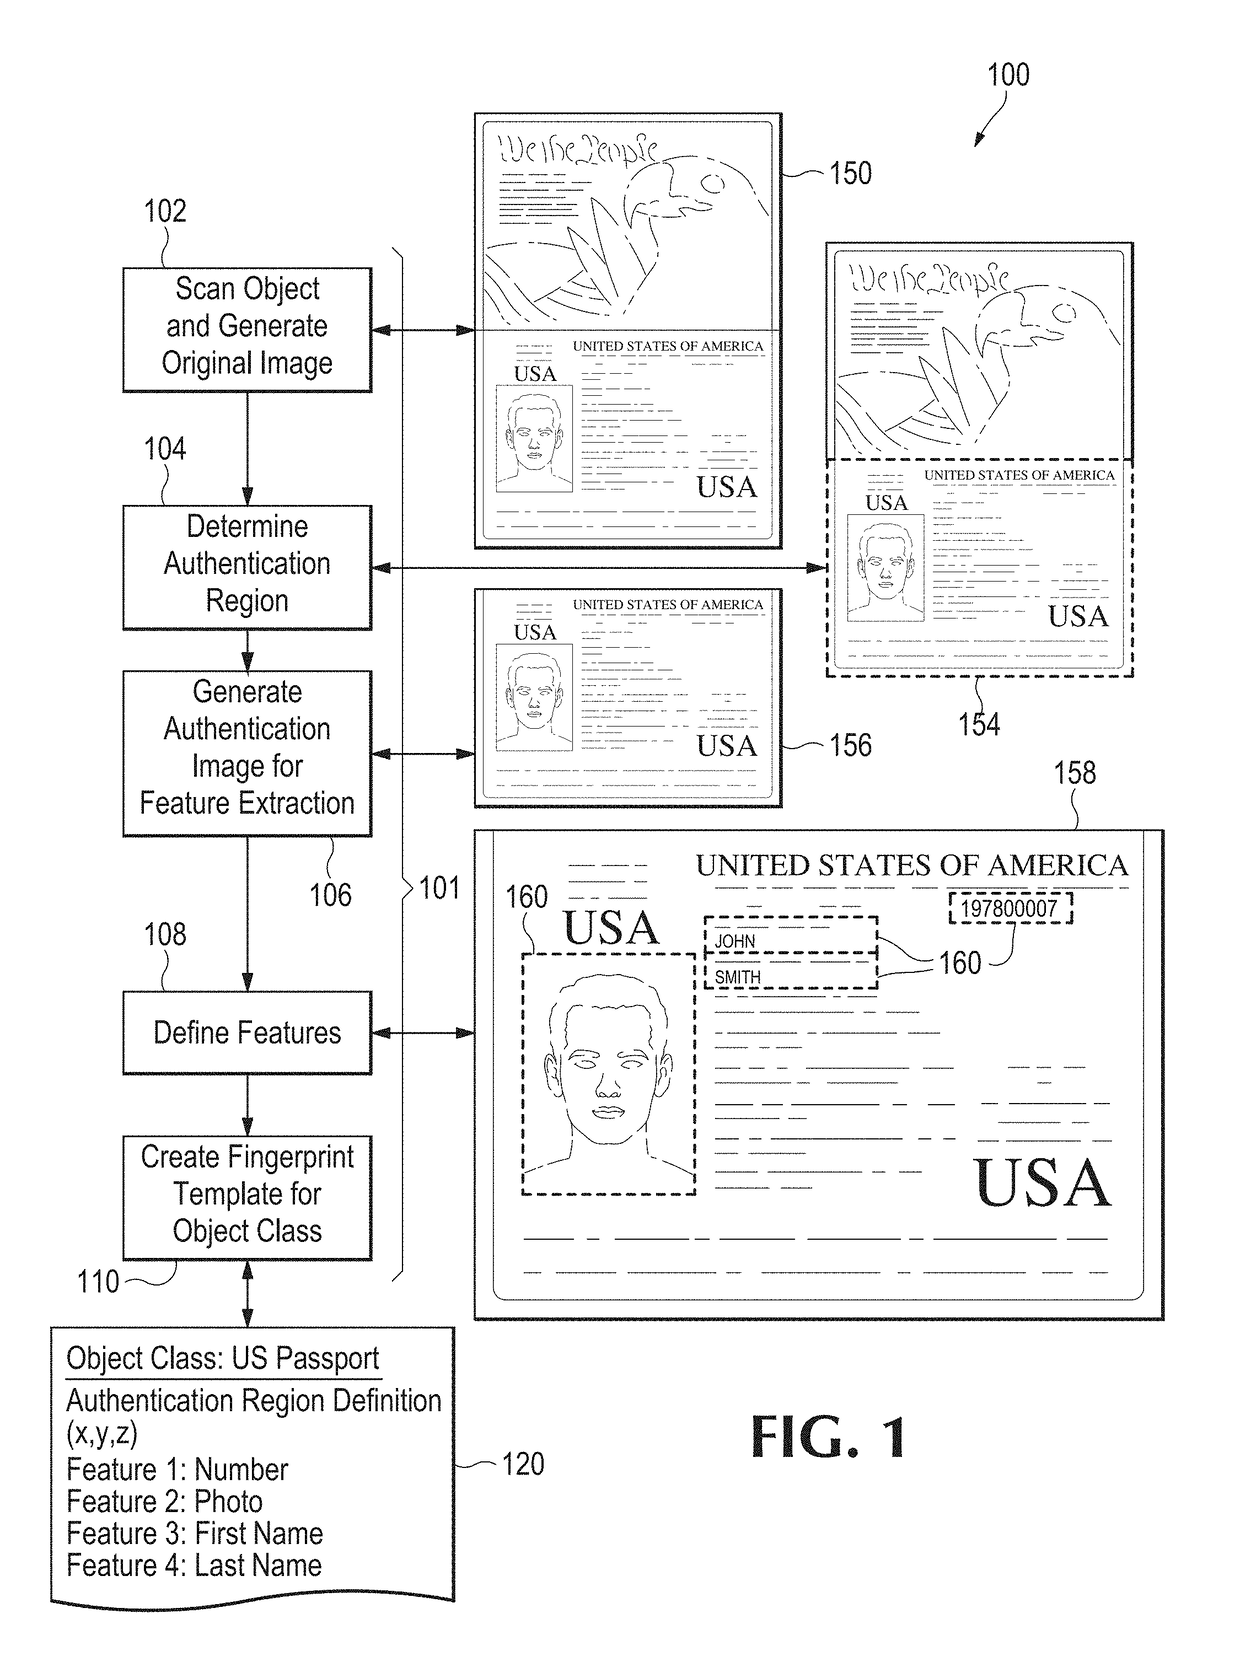 Controlled authentication of physical objects